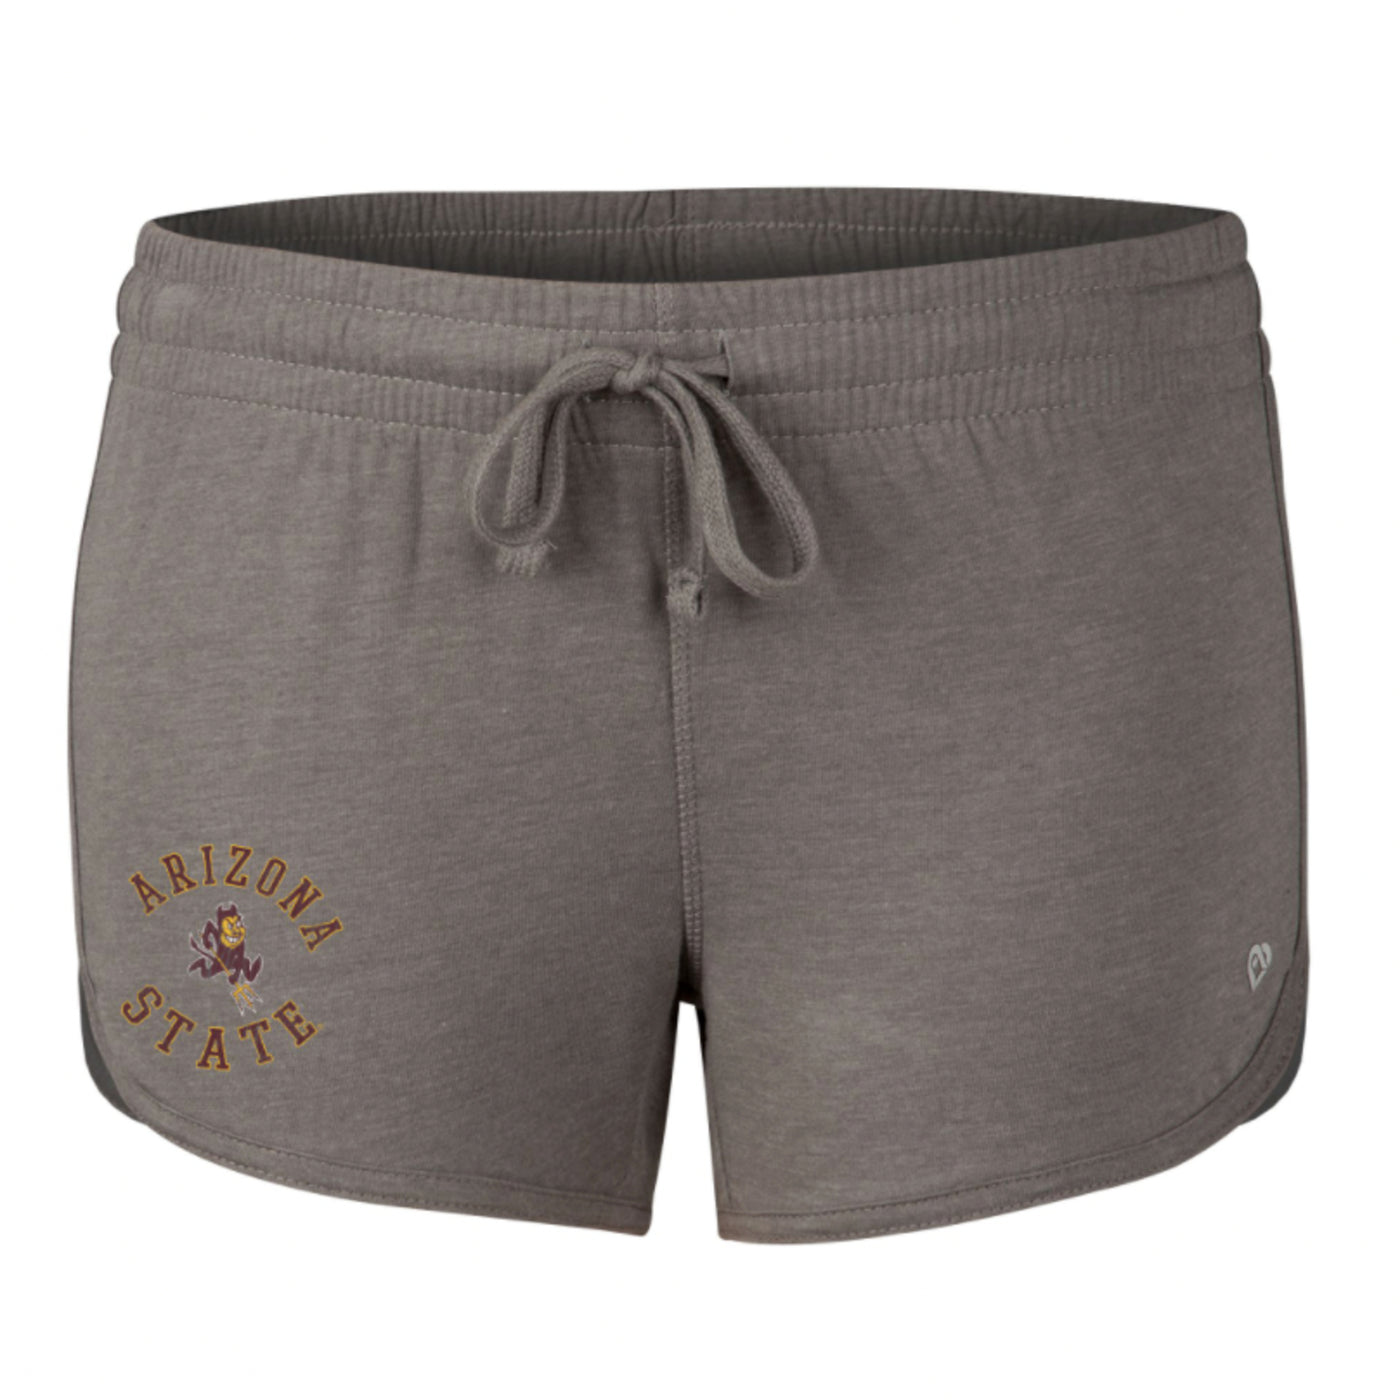 ASU gray women's shorts with elastic waistband, drawstring, and 'Arizona State' lettering on the  right pant leg surrounding the Sparky logo